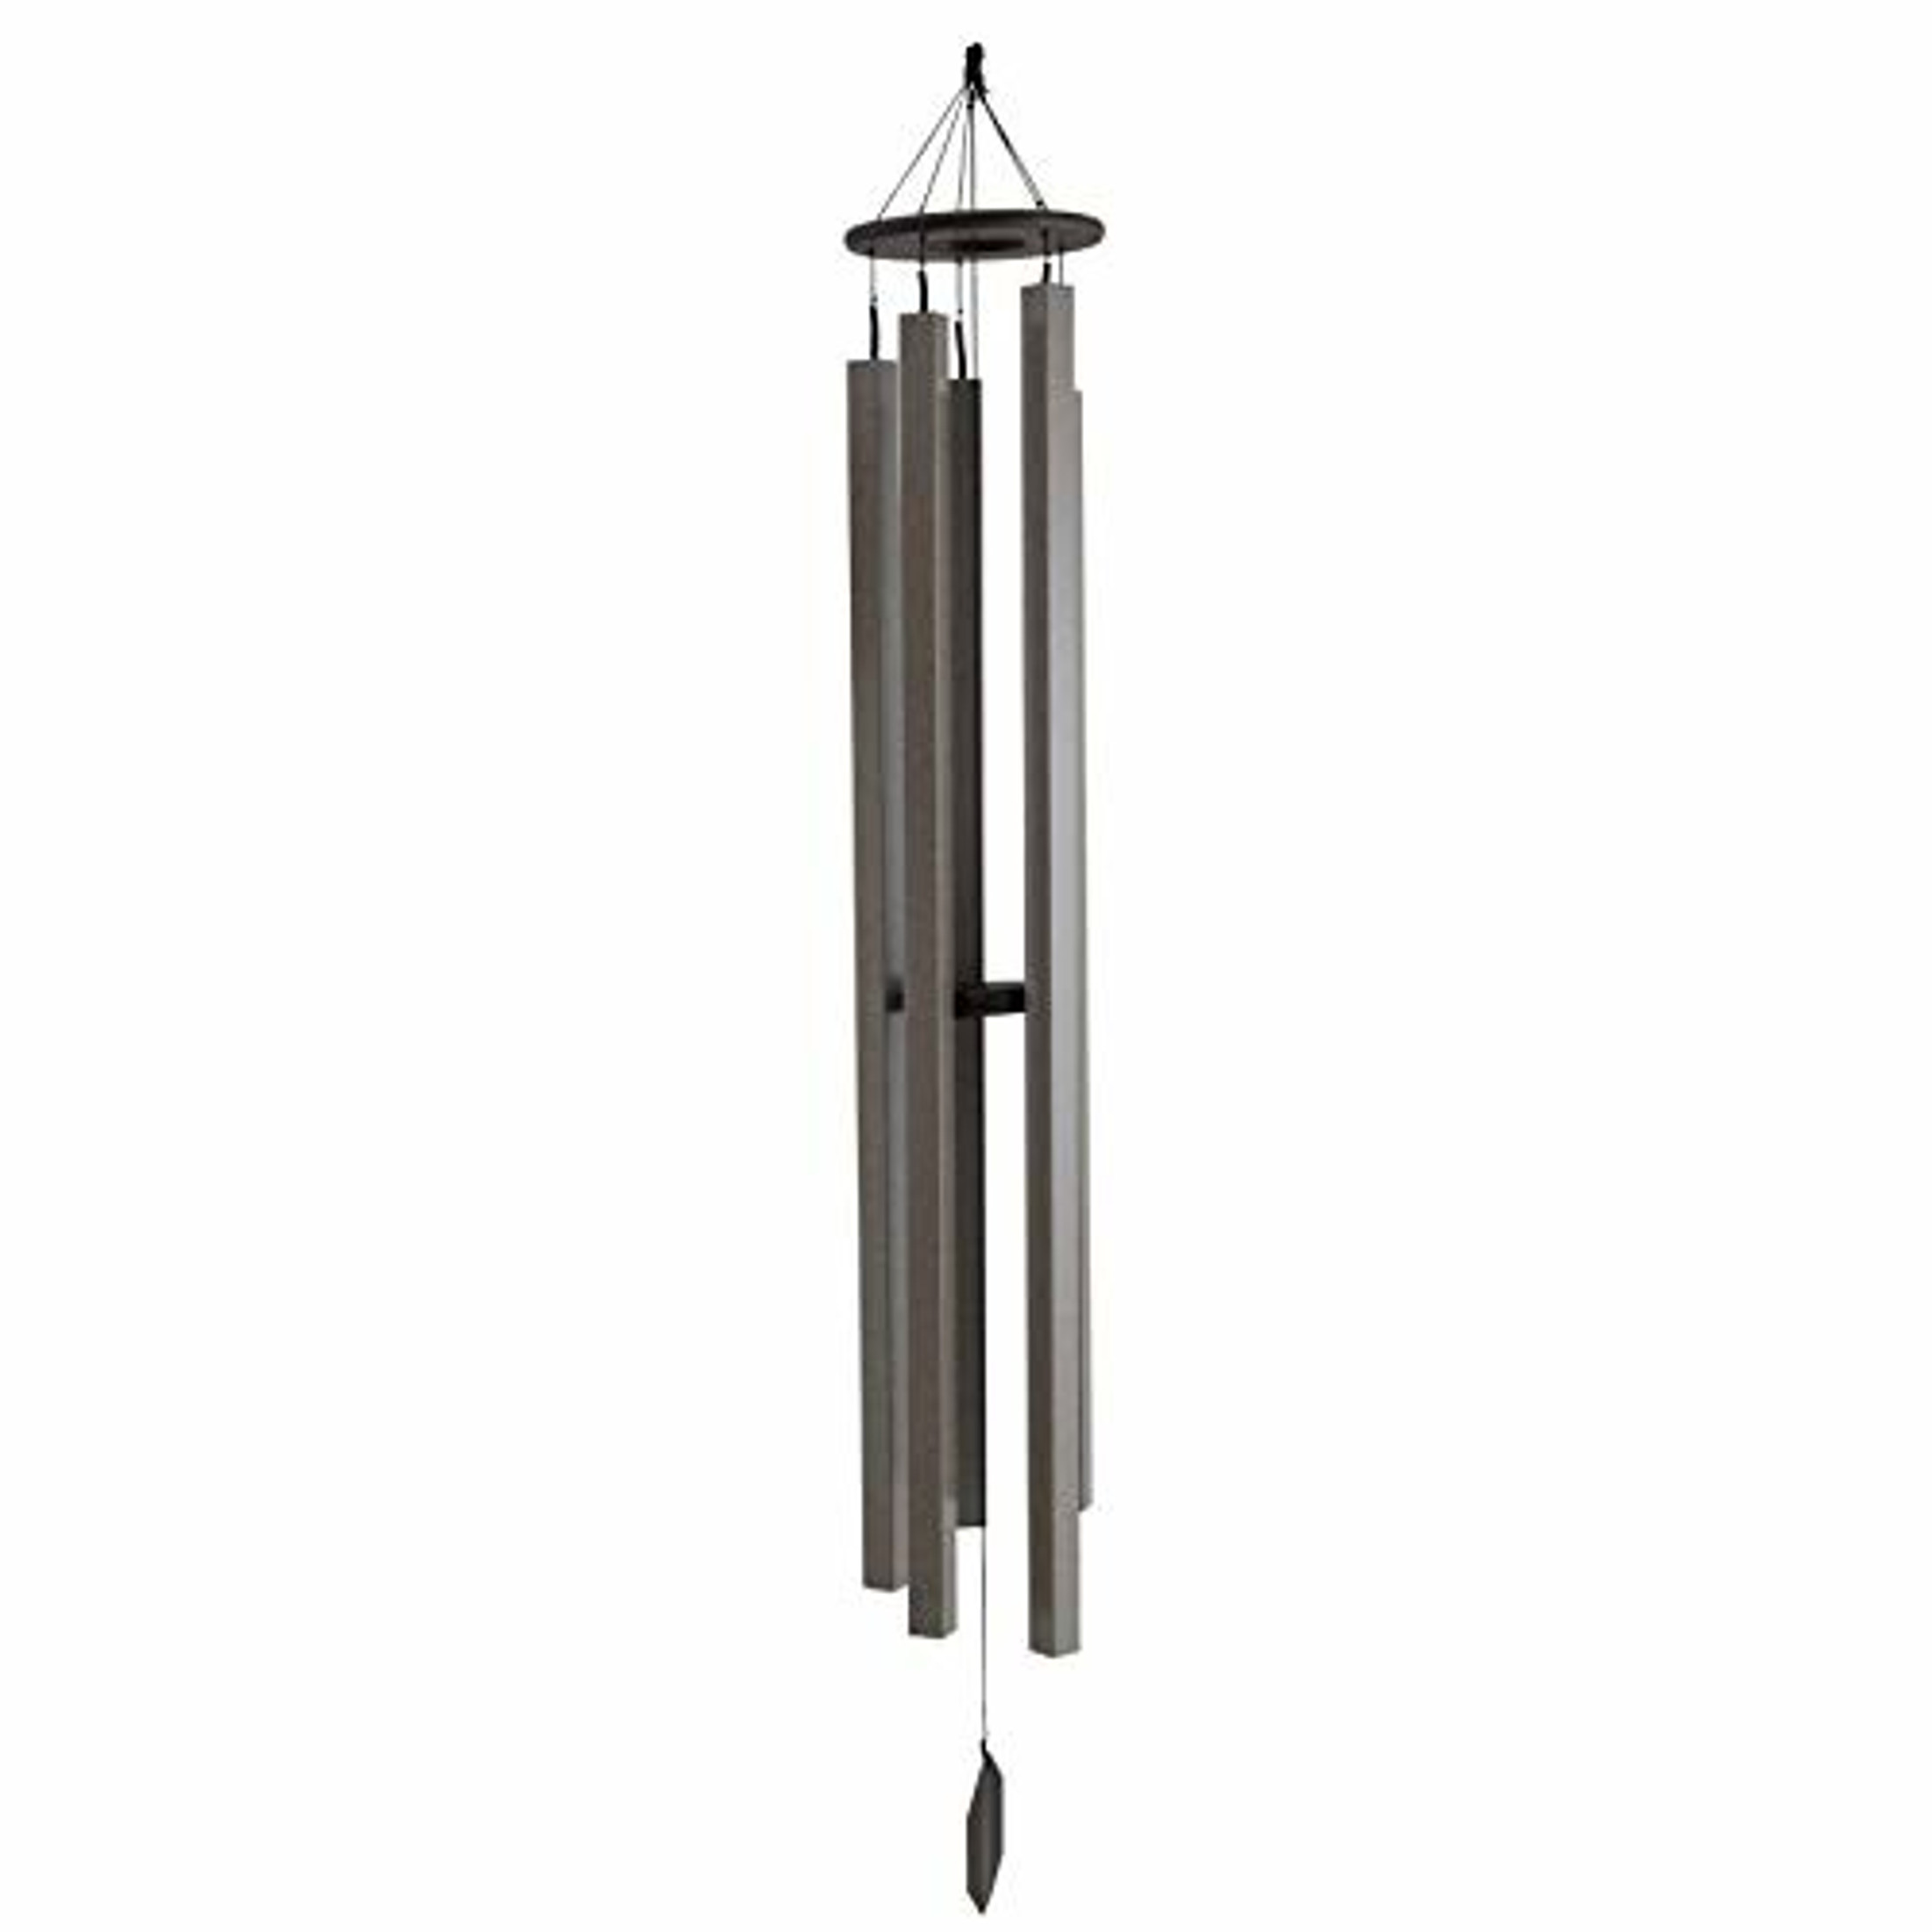 73" Sunsetter Wind Chime - Amish Handcrafted Country Chime